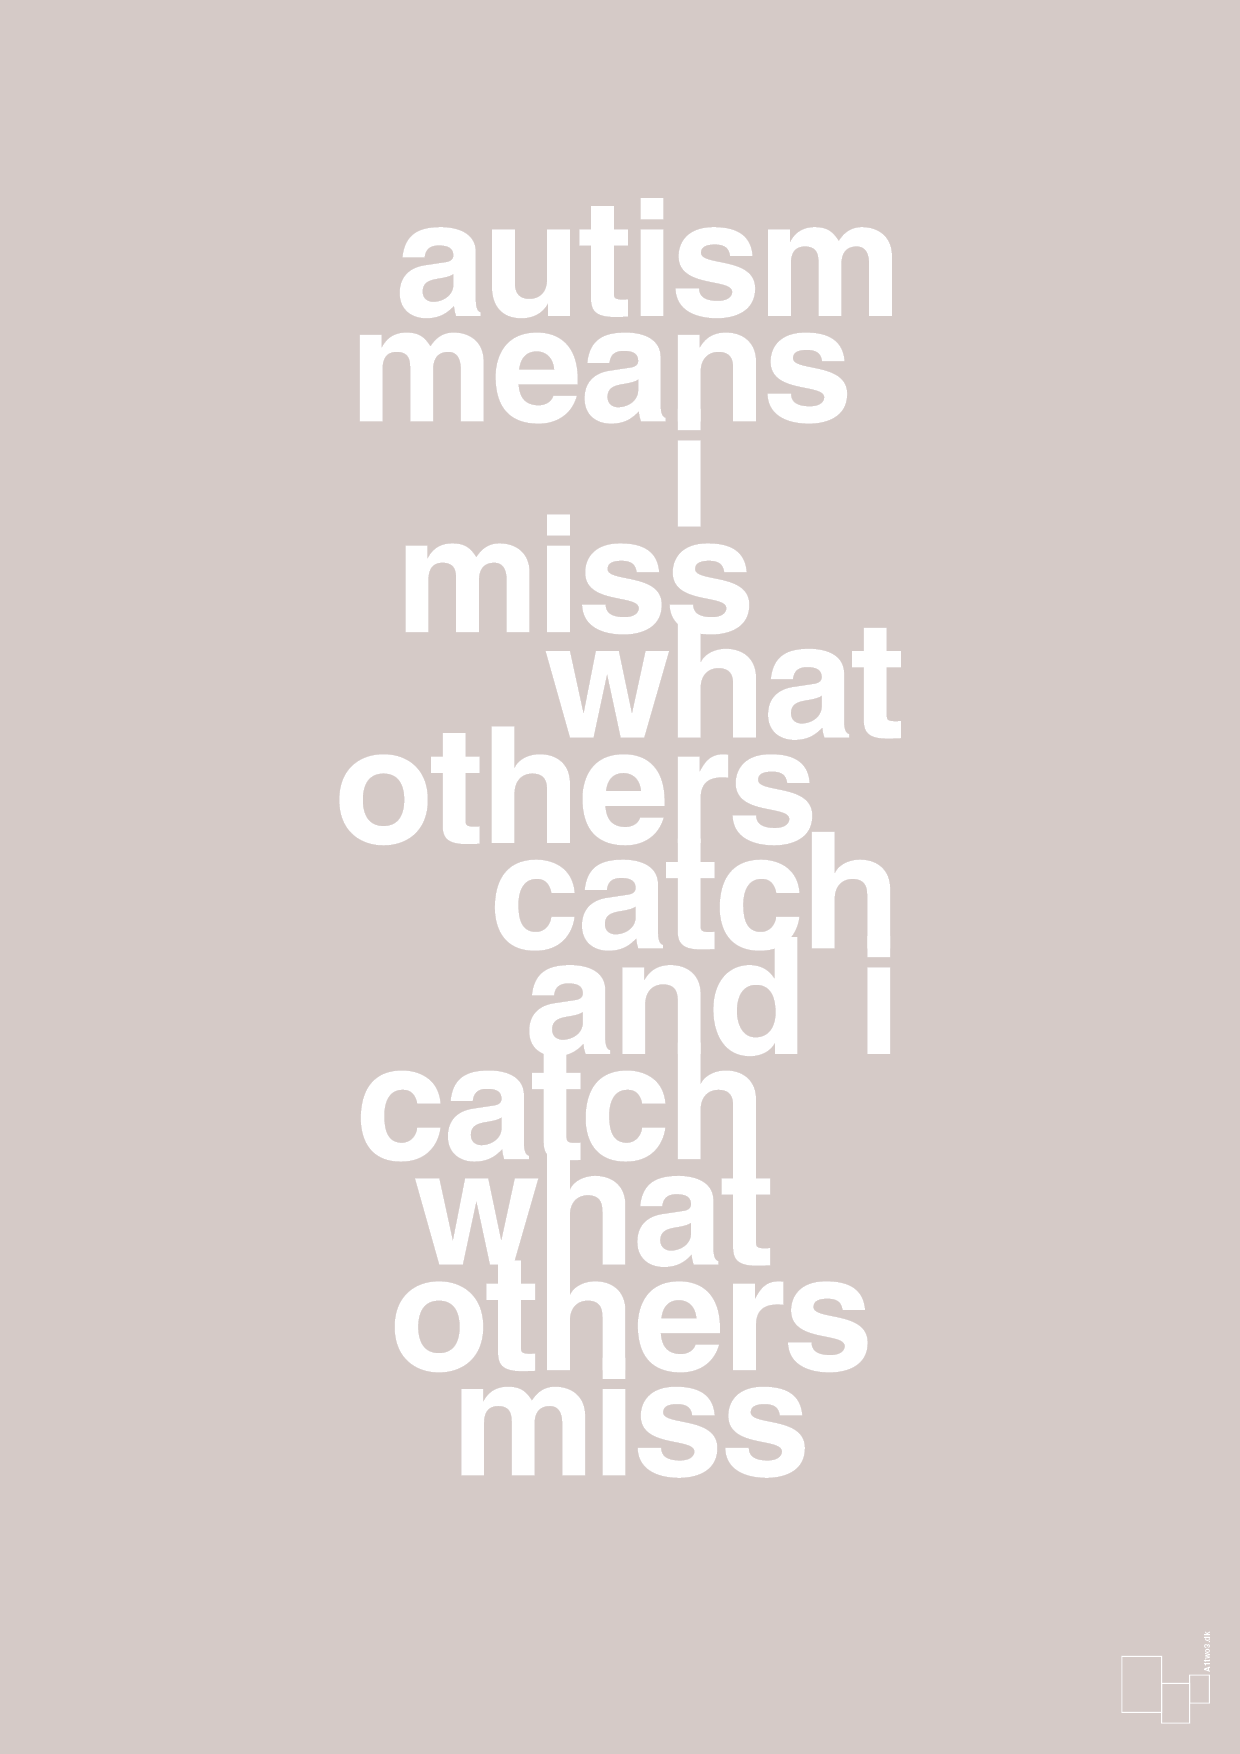 autism means i miss what others catch and i catch what others miss - Plakat med Samfund i Broken Beige